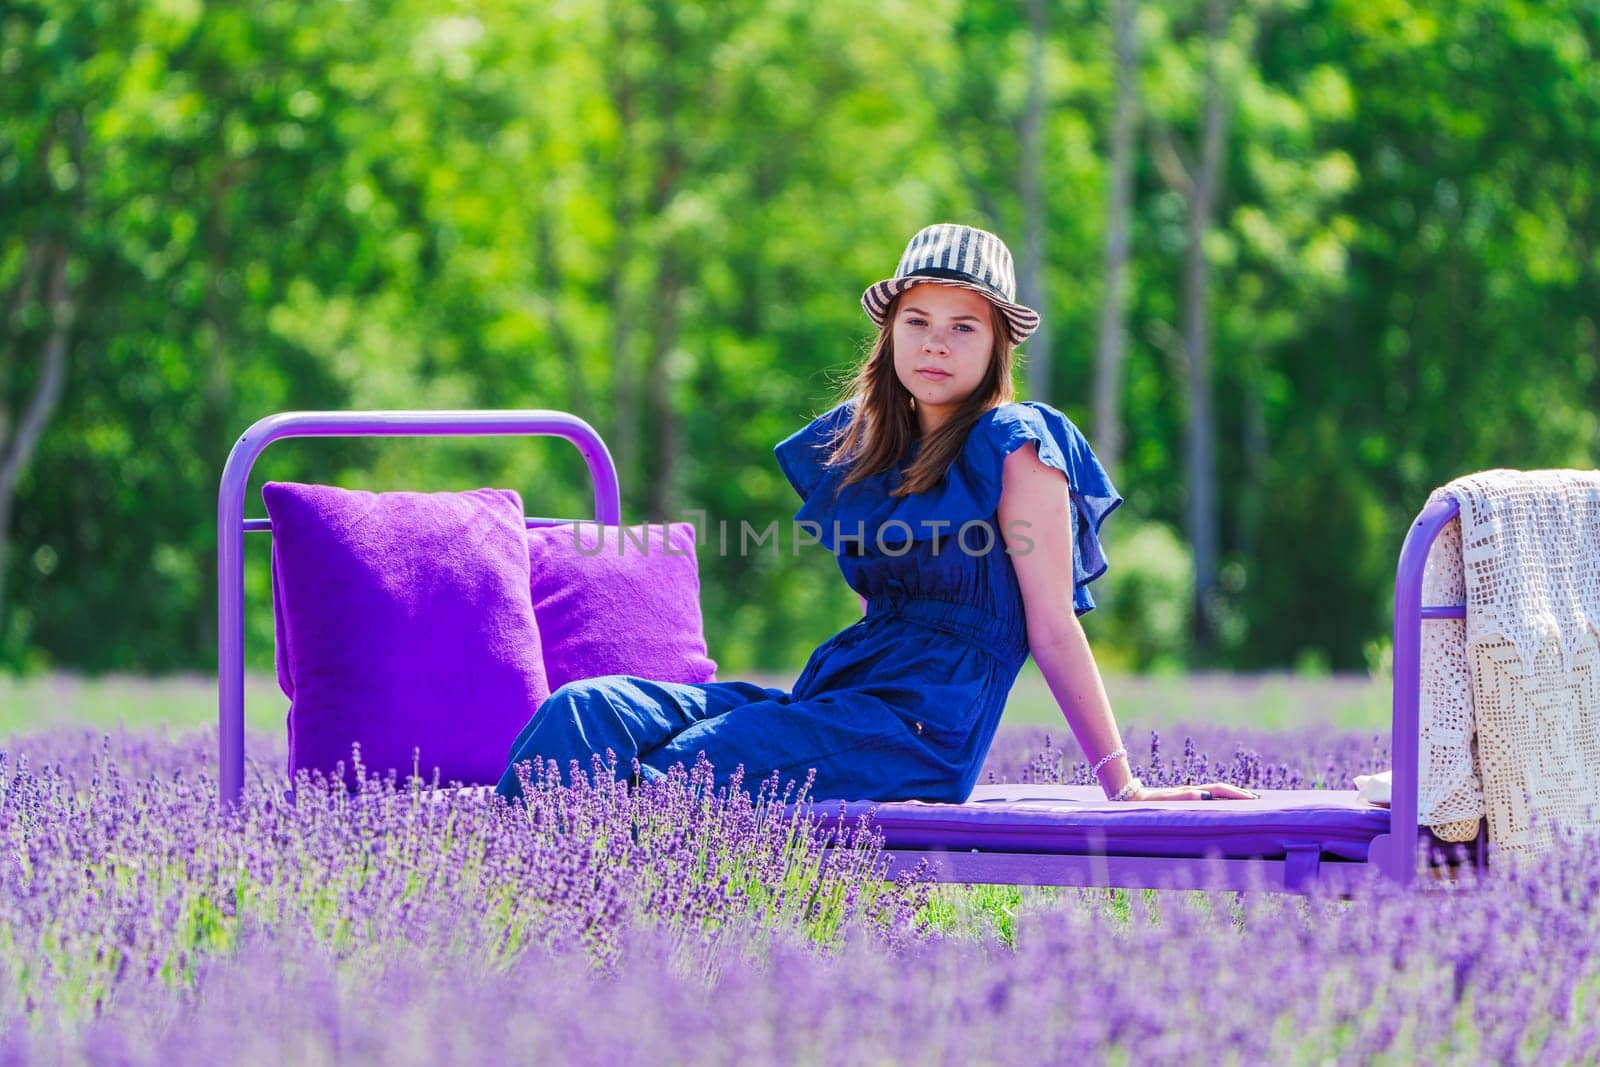 A Beautiful Girl amidst Lavender Fields. A Dreamy Summer Photo Session in the Lavender Field by PhotoTime